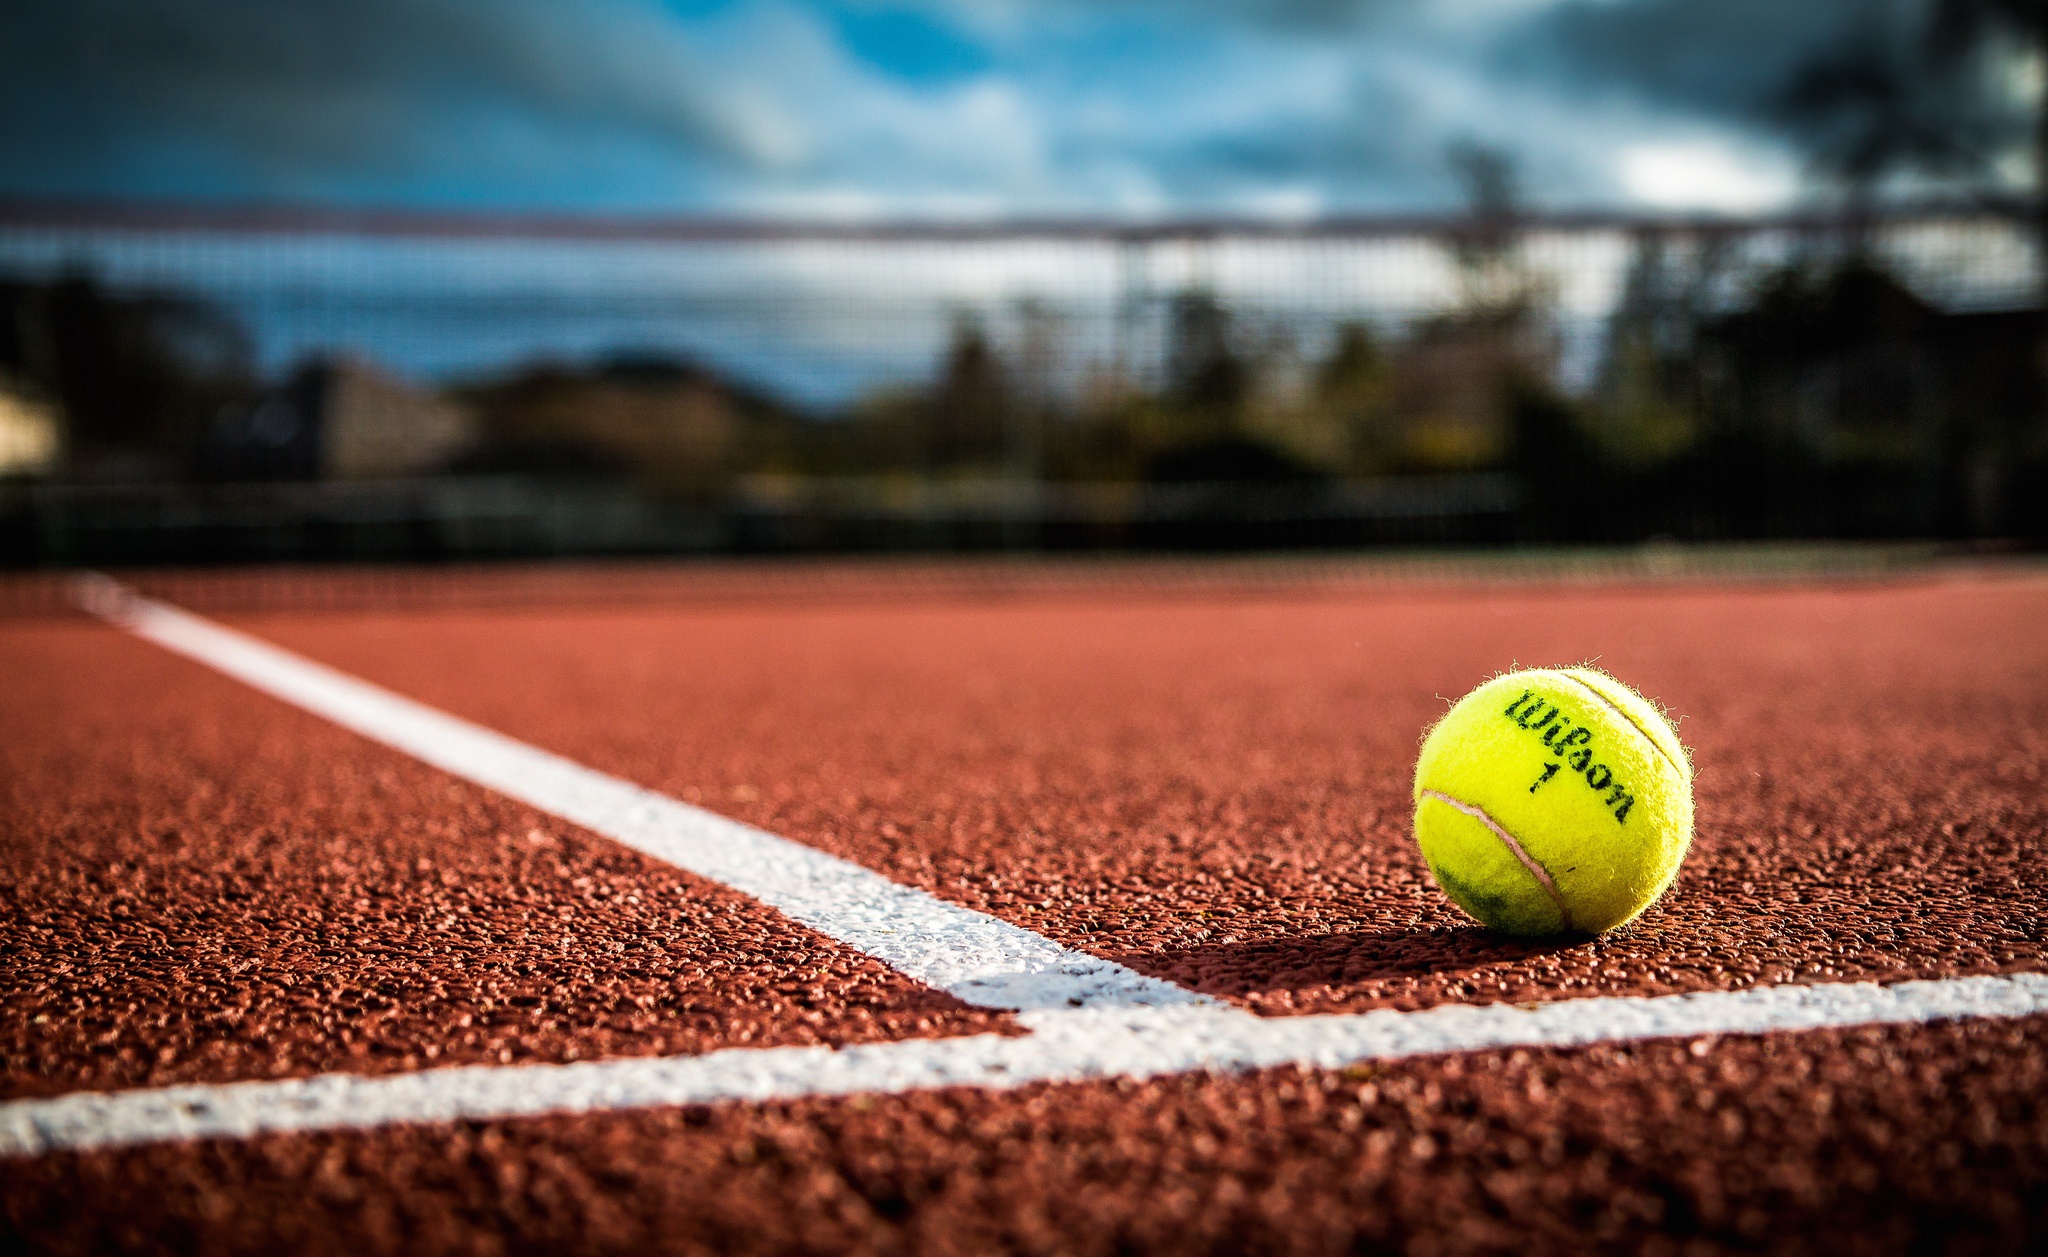 542277 1920x1200 free screensaver wallpapers for tennis - Rare Gallery HD  Wallpapers